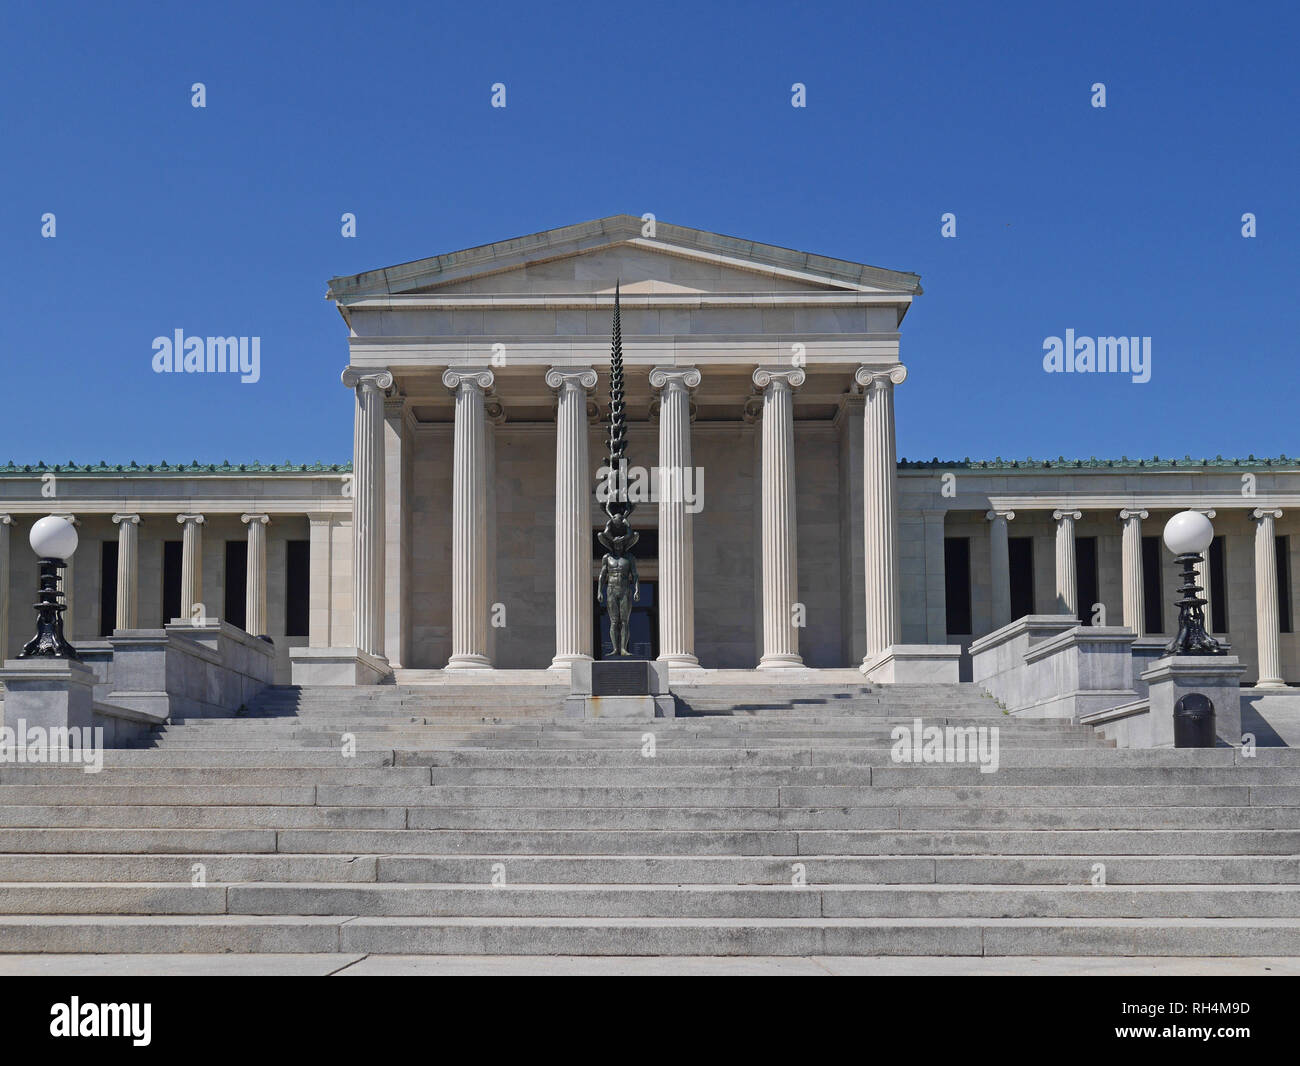 BUFFALO, USA - AUGUST 2016:  The Albright Knox Art Gallery's external design mimics a Greek Temple, but its collection is devoted primarily to modern  Stock Photo